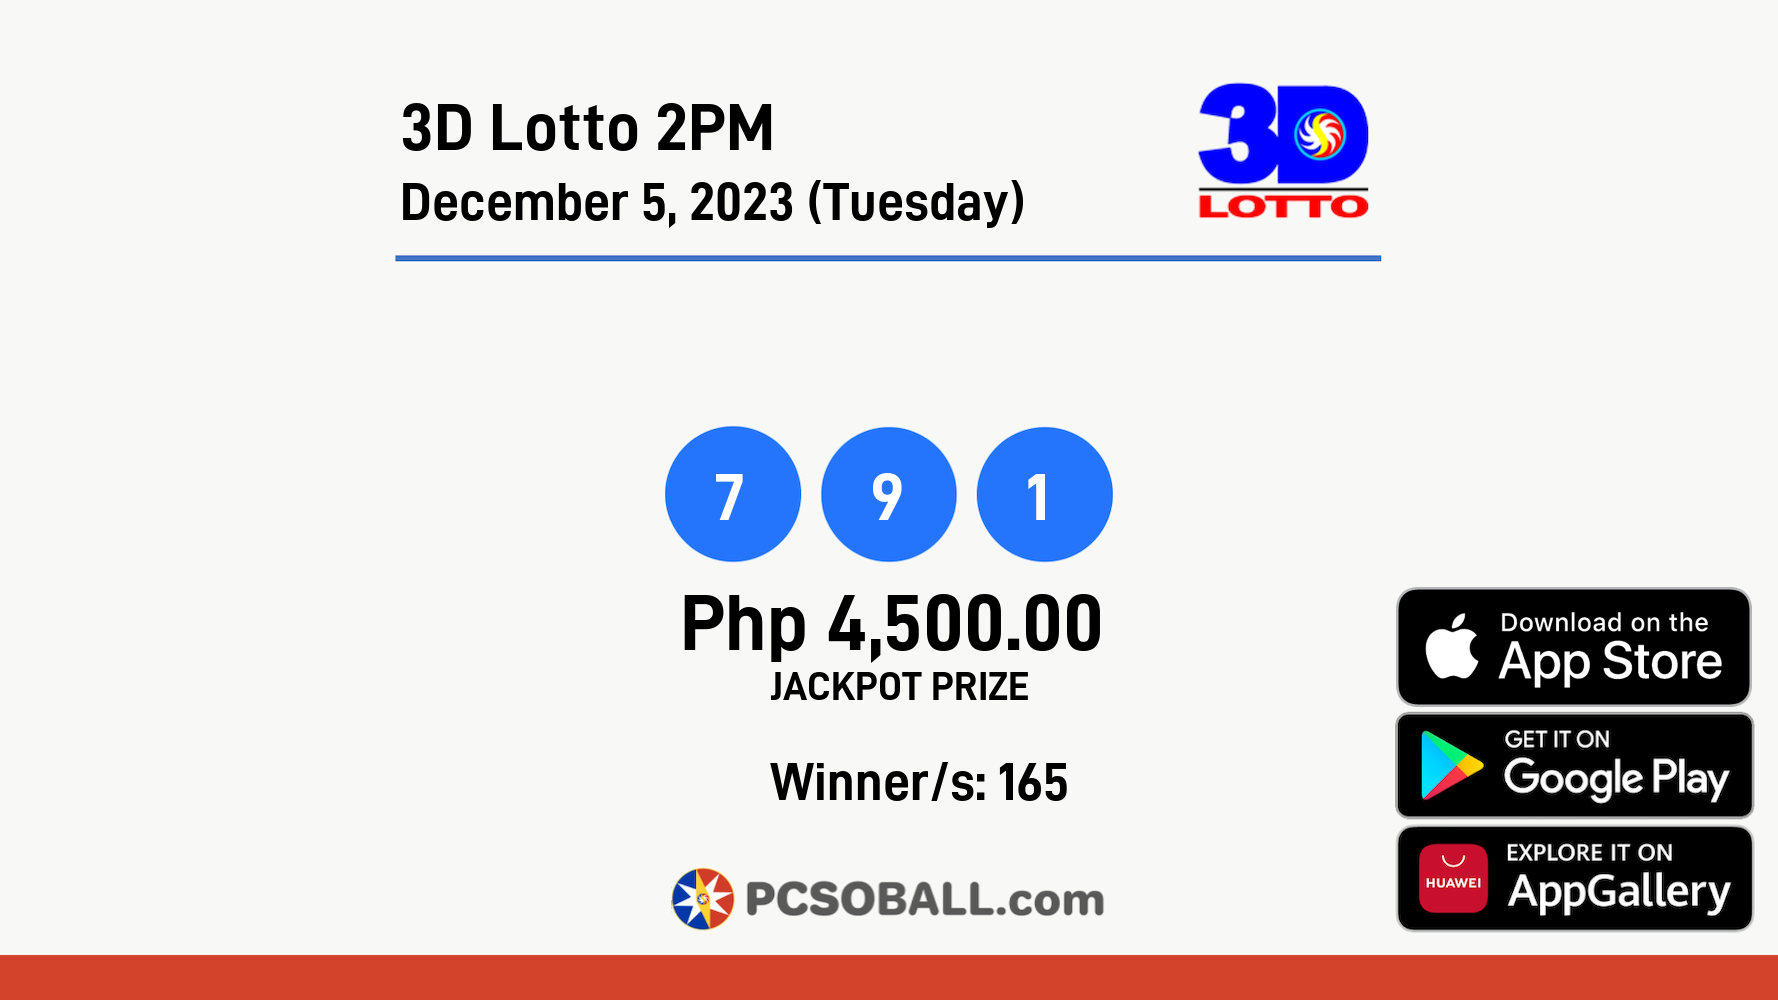 3D Lotto 2PM December 5, 2023 (Tuesday) Result